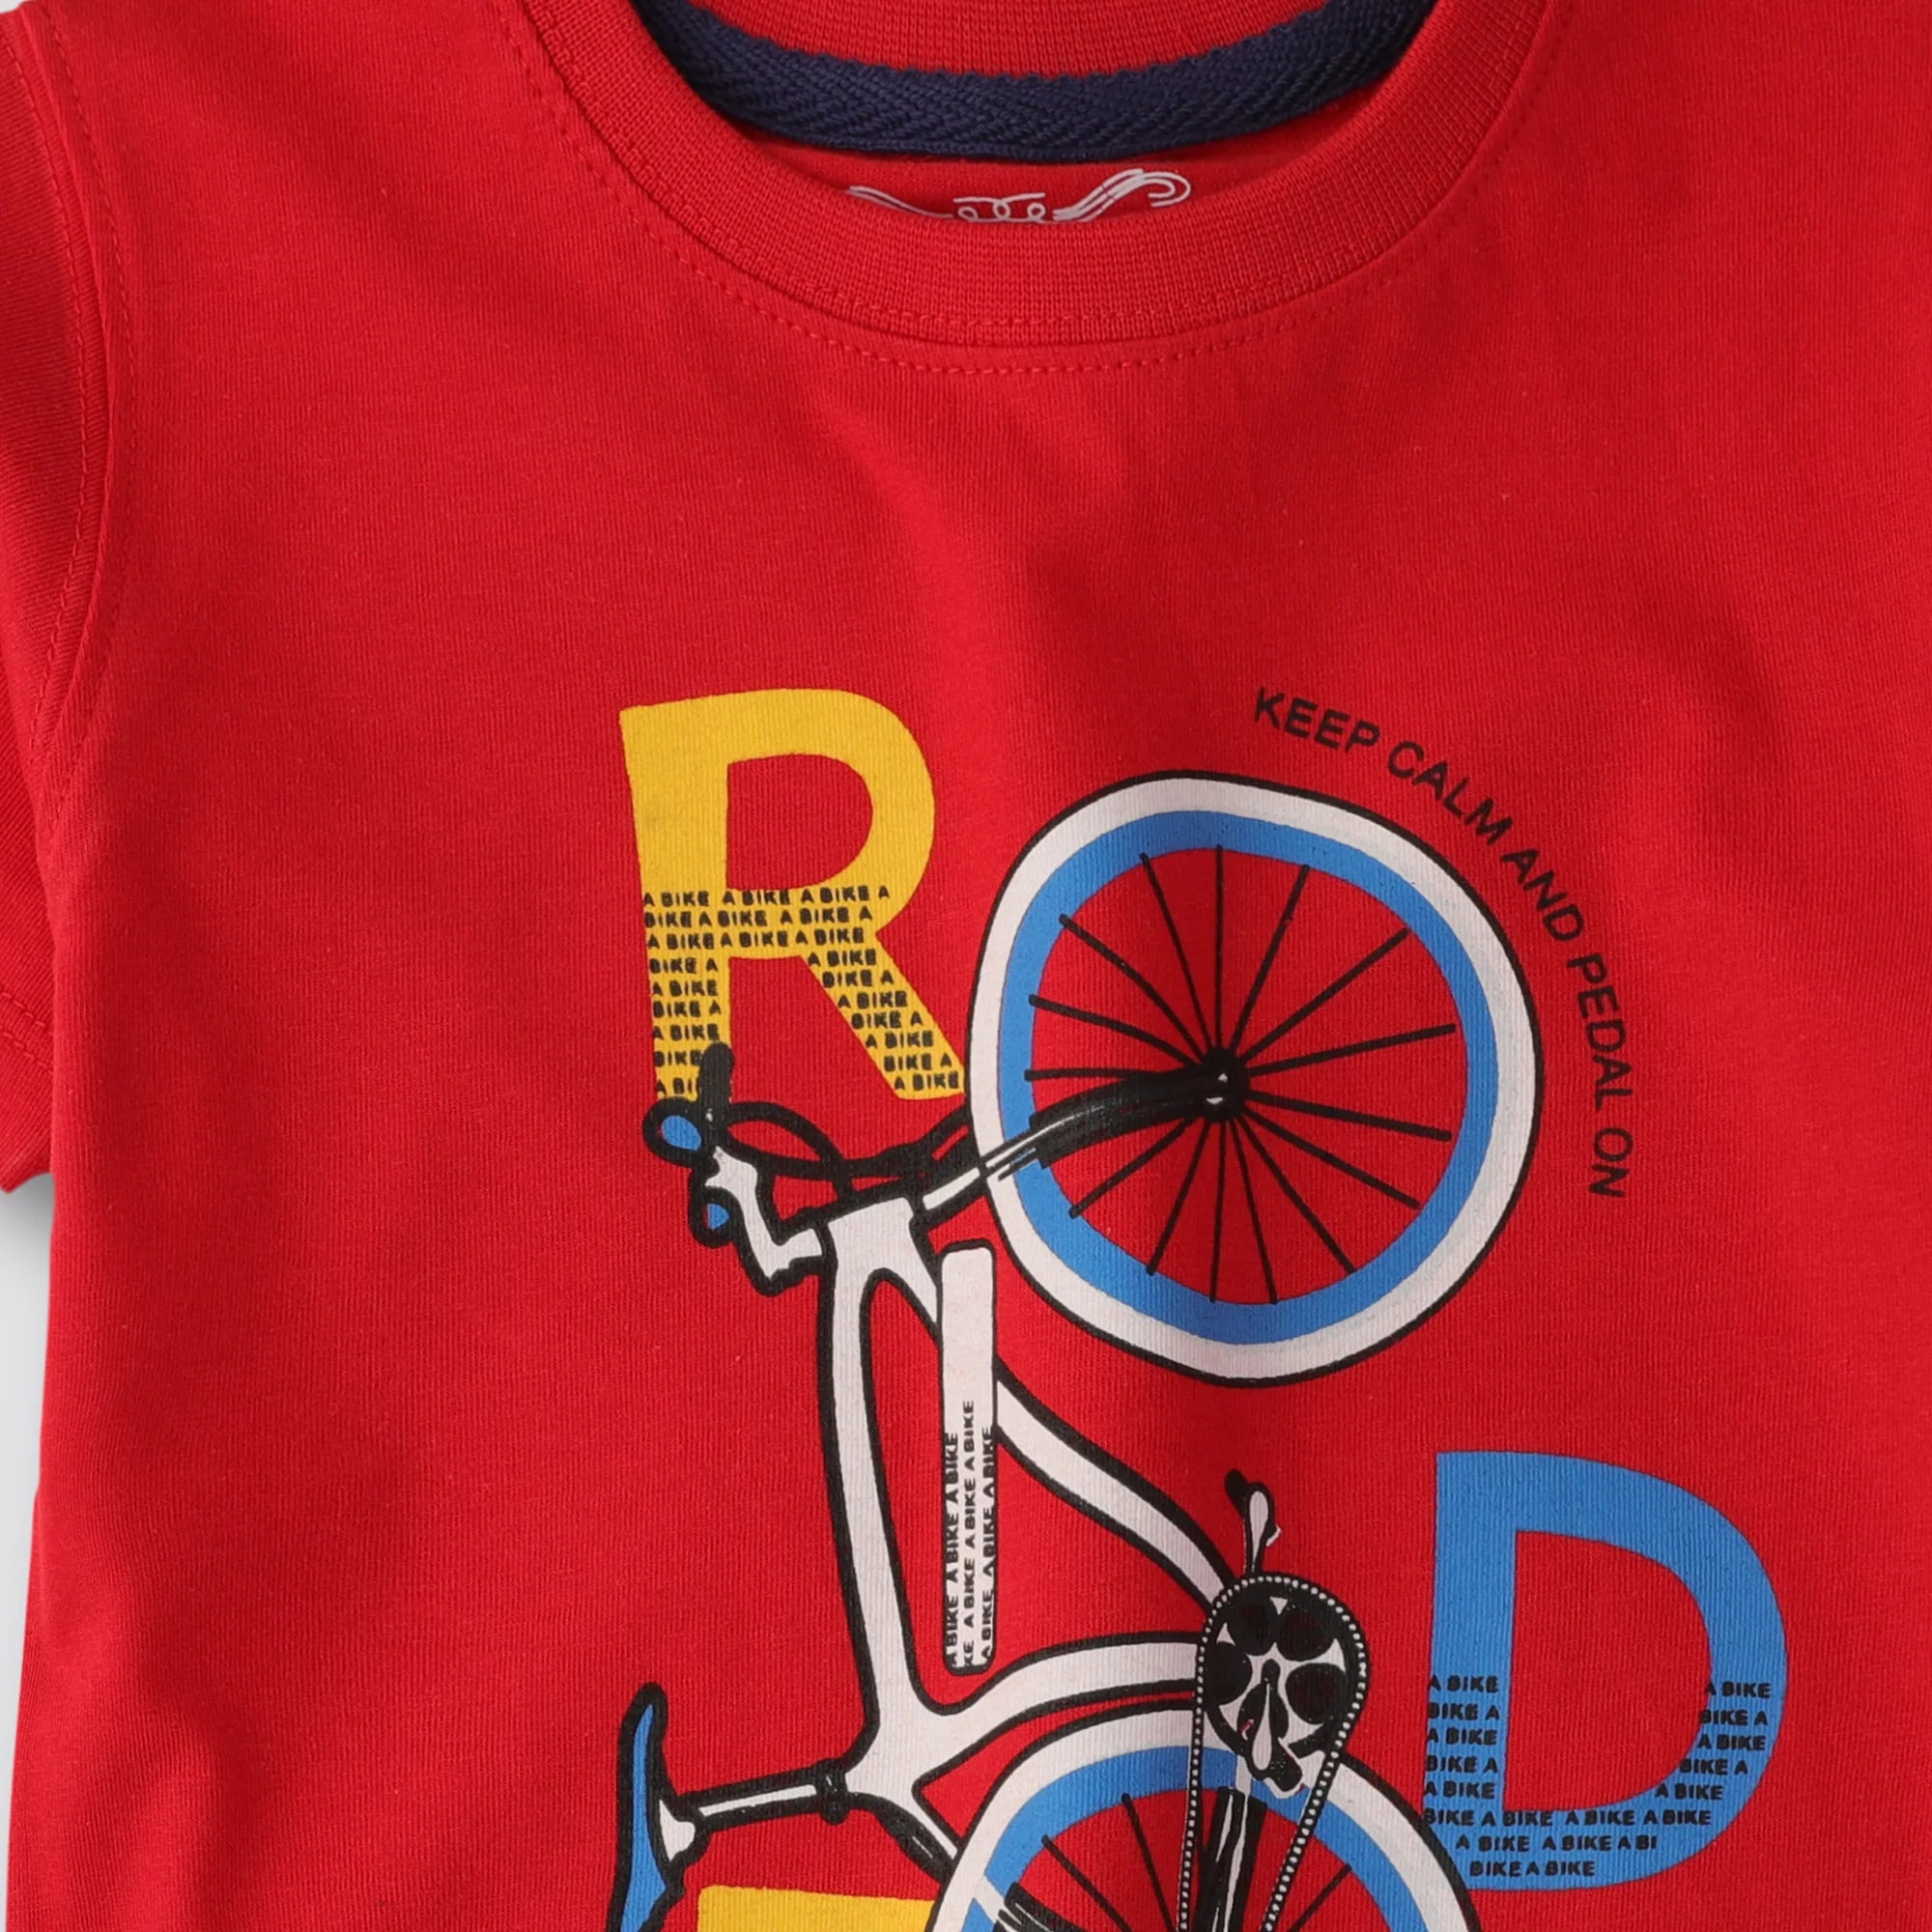 Young Cyclists Tee